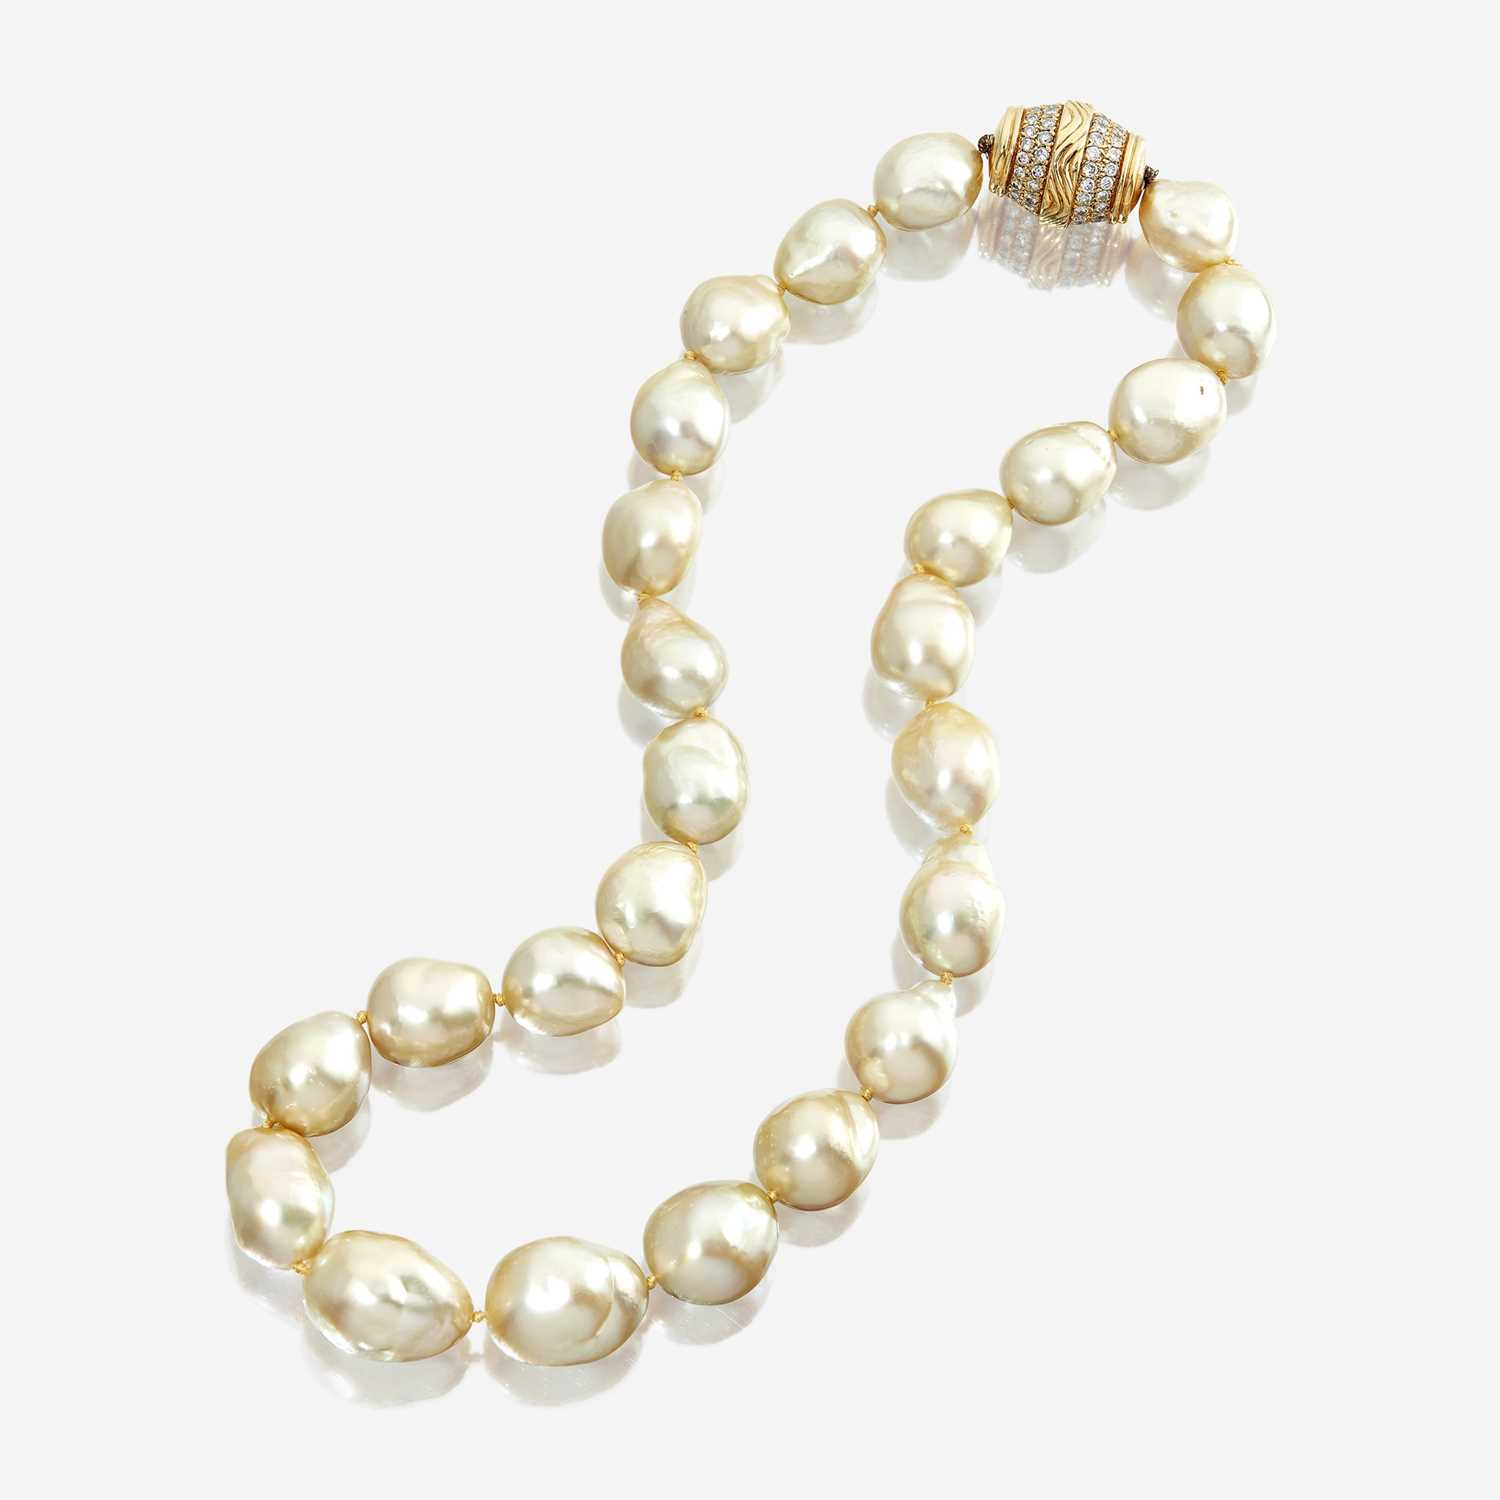 Lot 29 - A South Sea baroque cultured pearl, diamond, and eighteen karat gold necklace